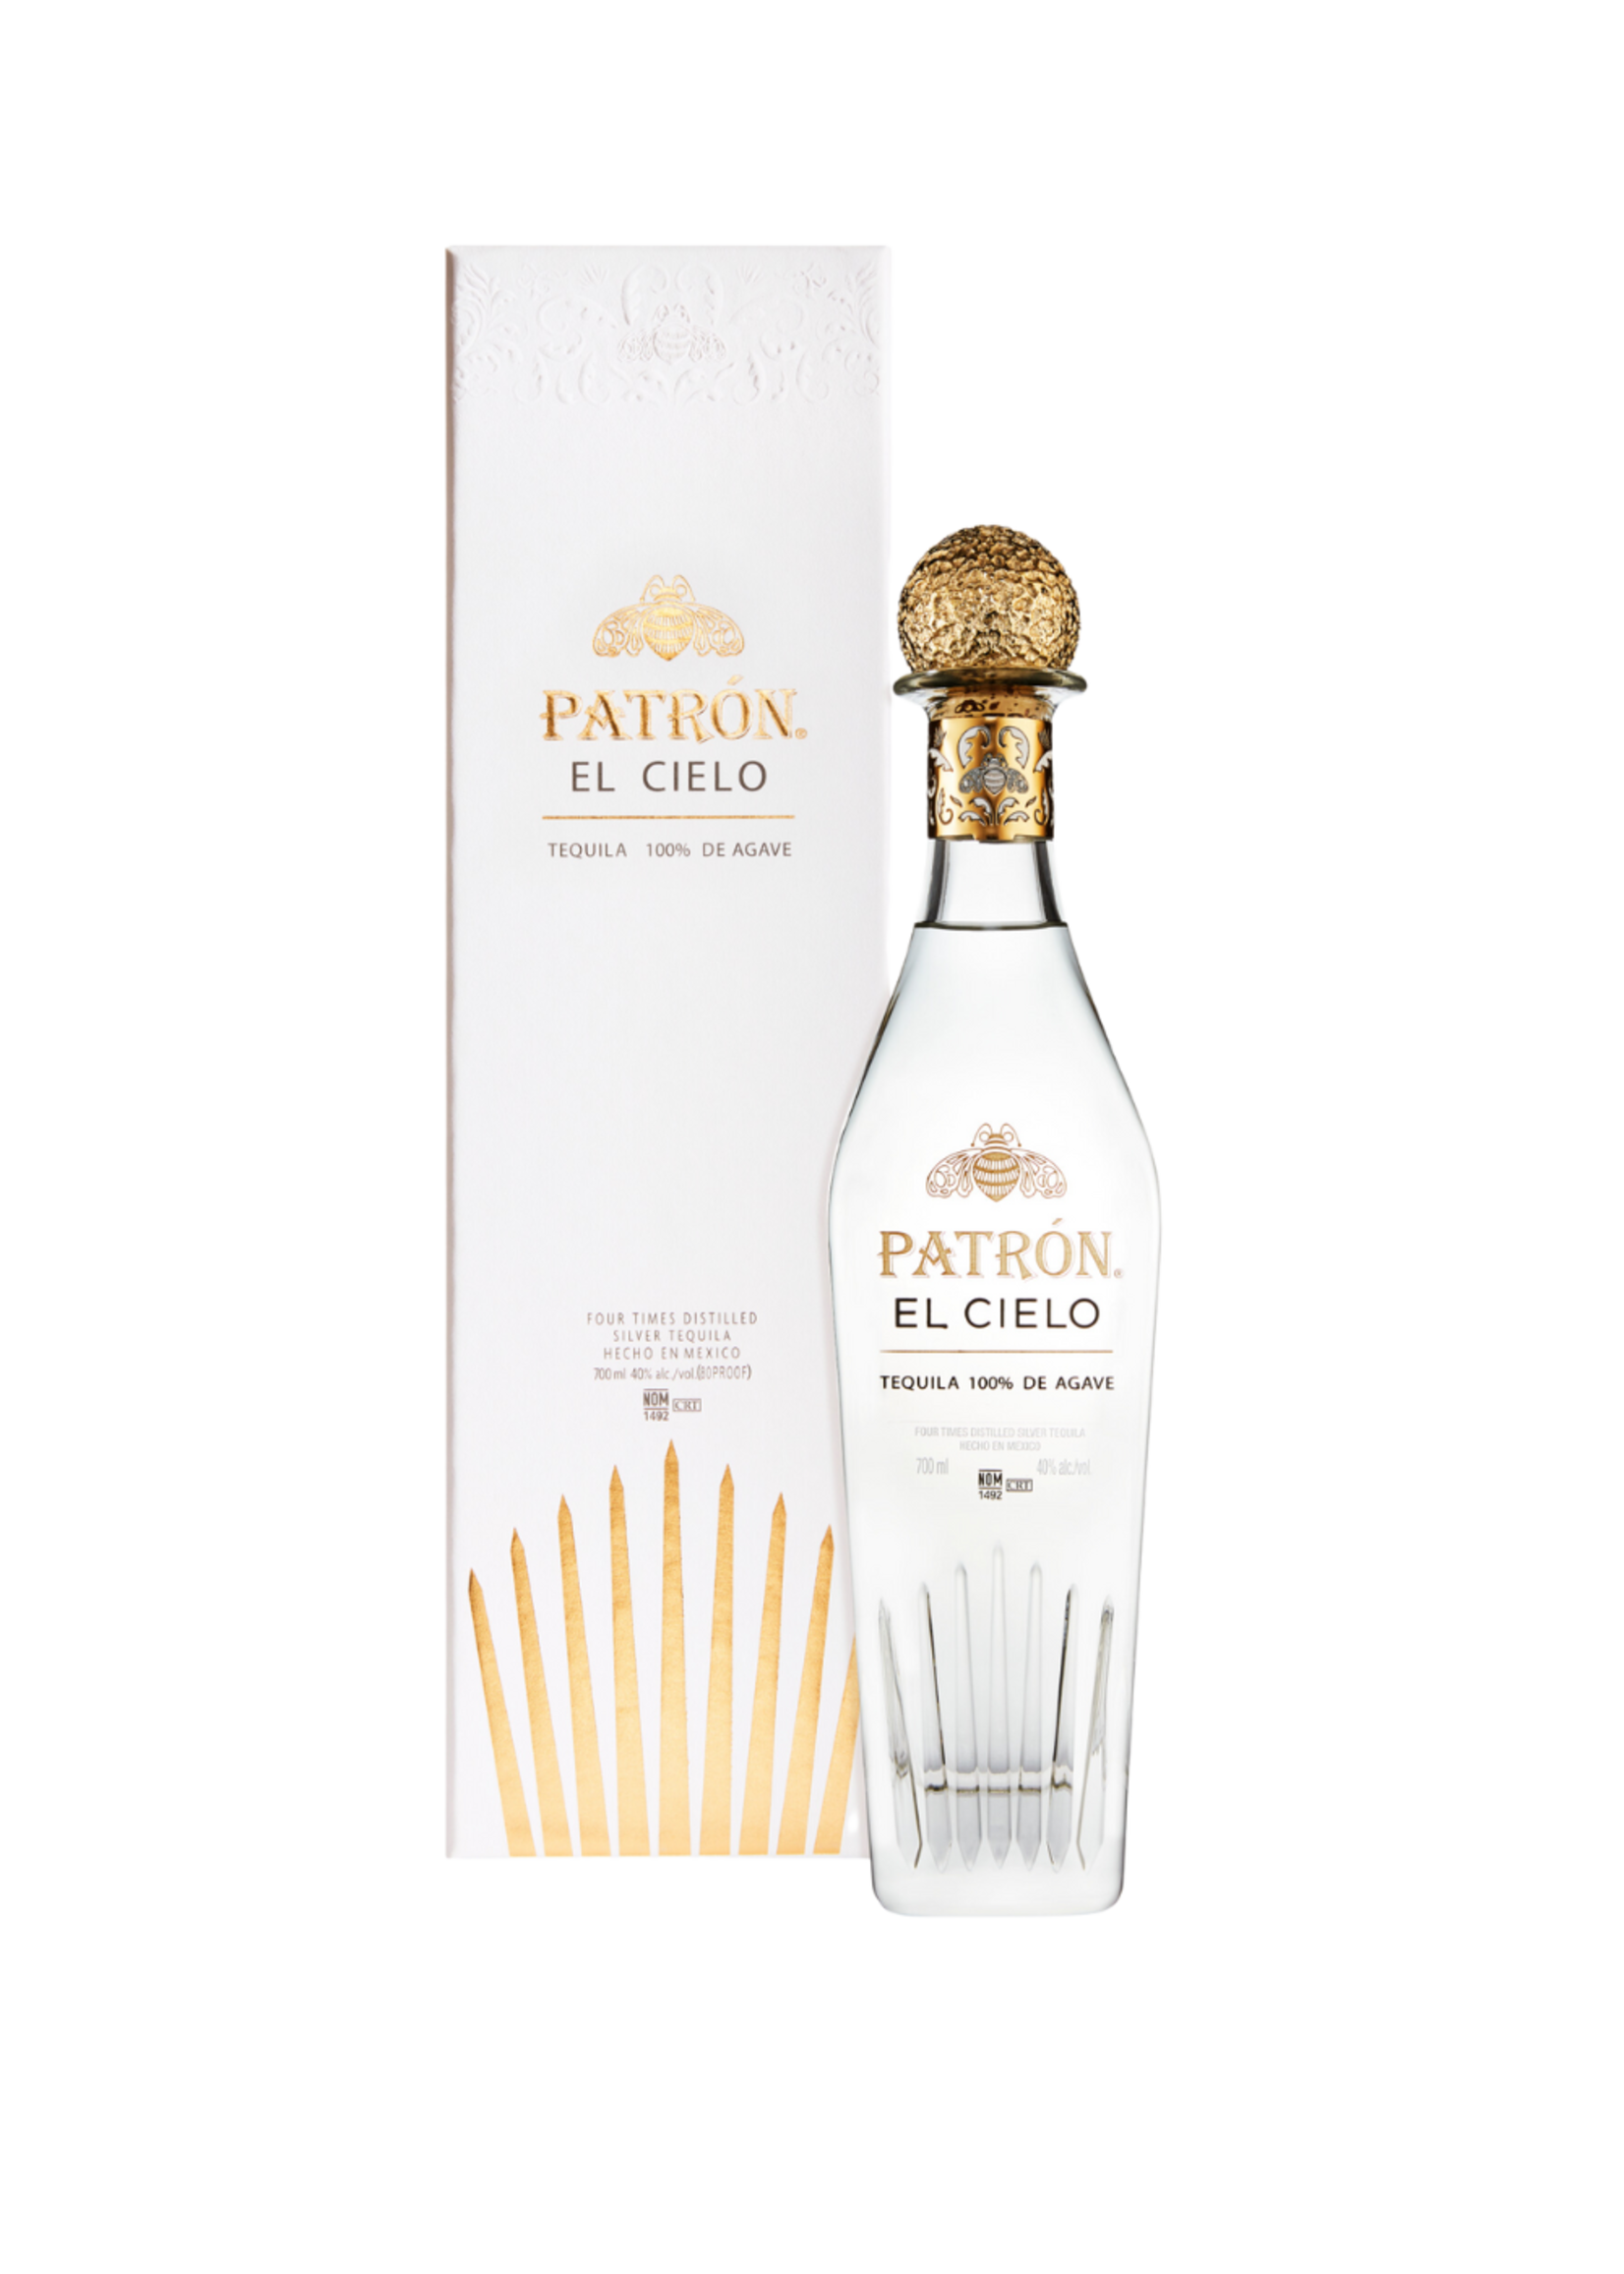 Patron Silver Tequila Cielo 80Proof 700ml